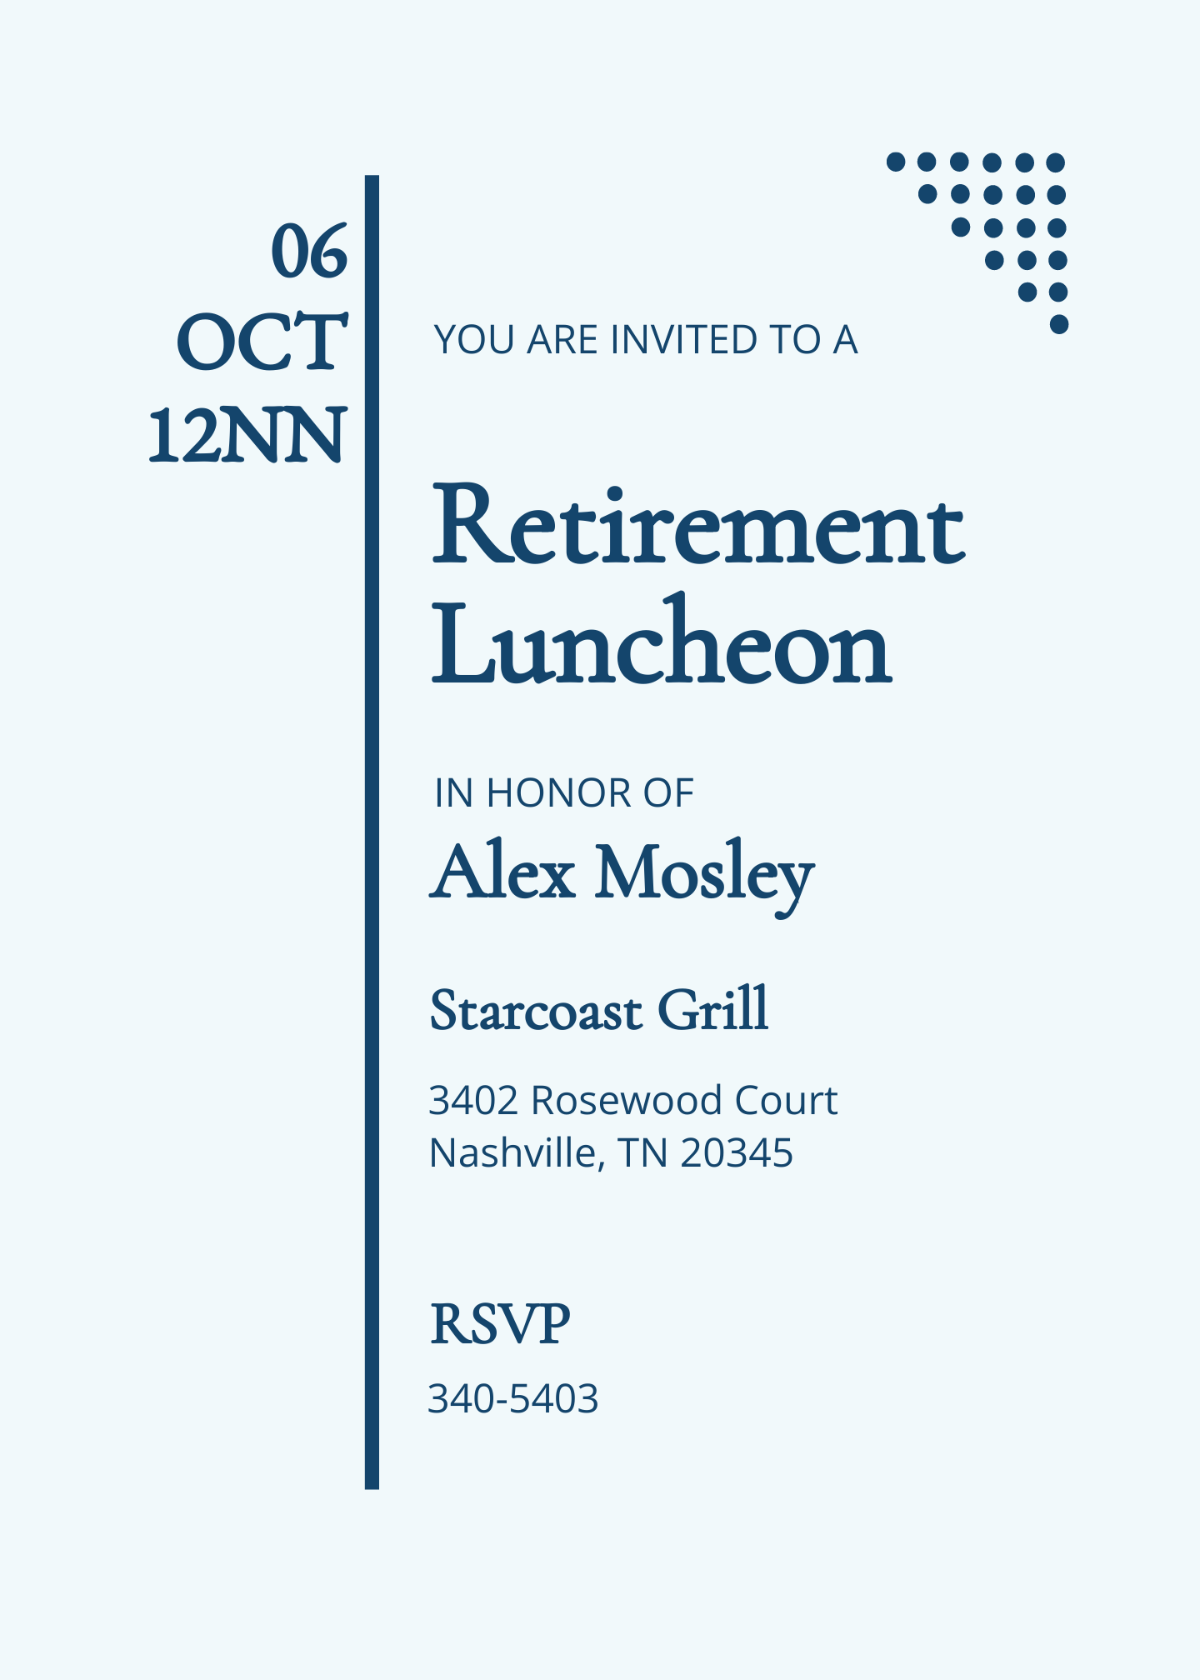 Free Retirement luncheon party invitation template